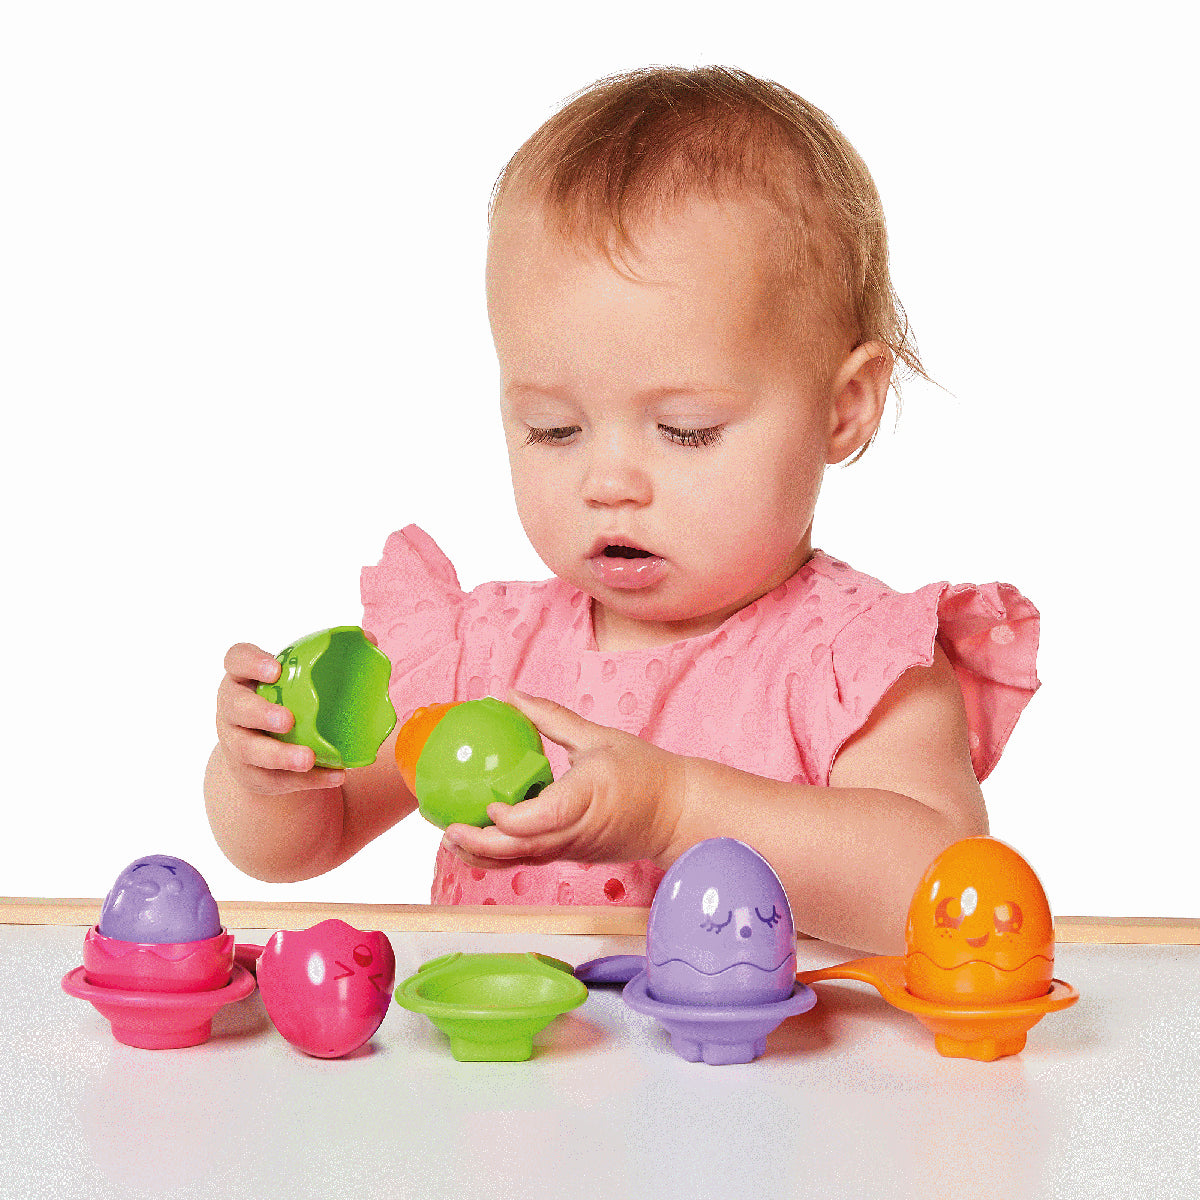 Toomies Hide And Squeak Egg And Spoon Set